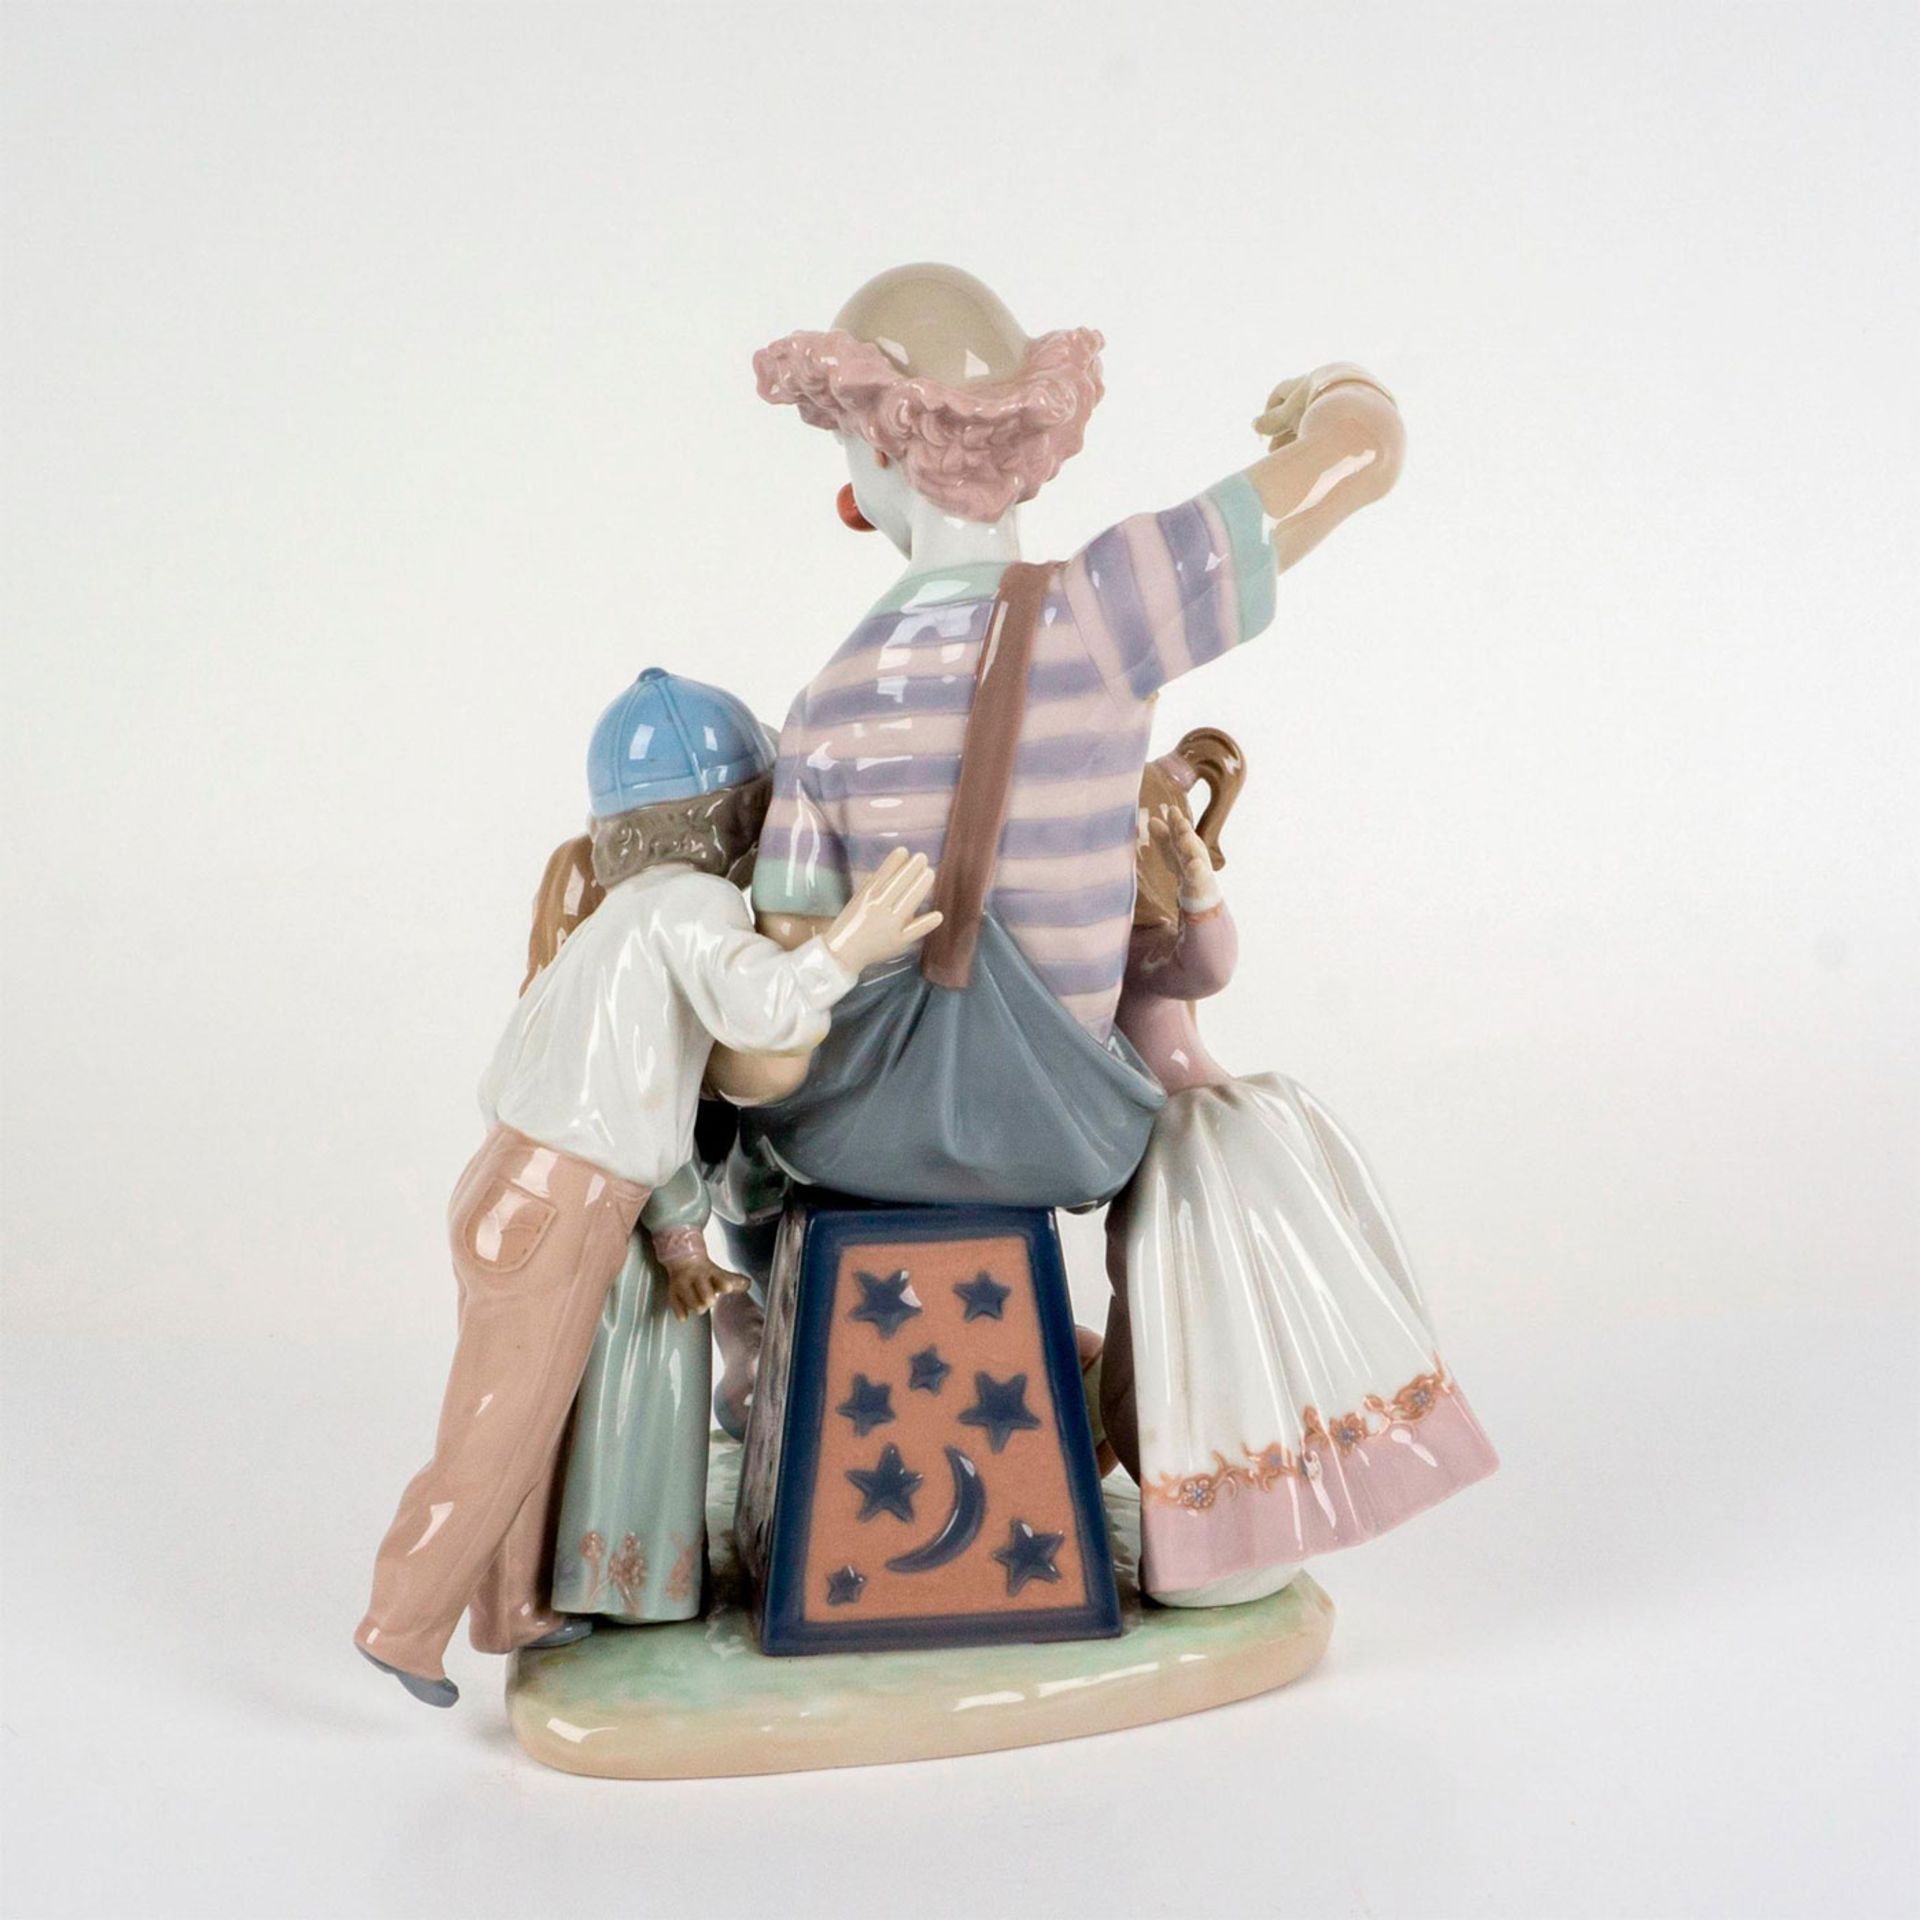 Lladro Porcelain Figurine The Magic of Laughter 1005771 - Image 2 of 4